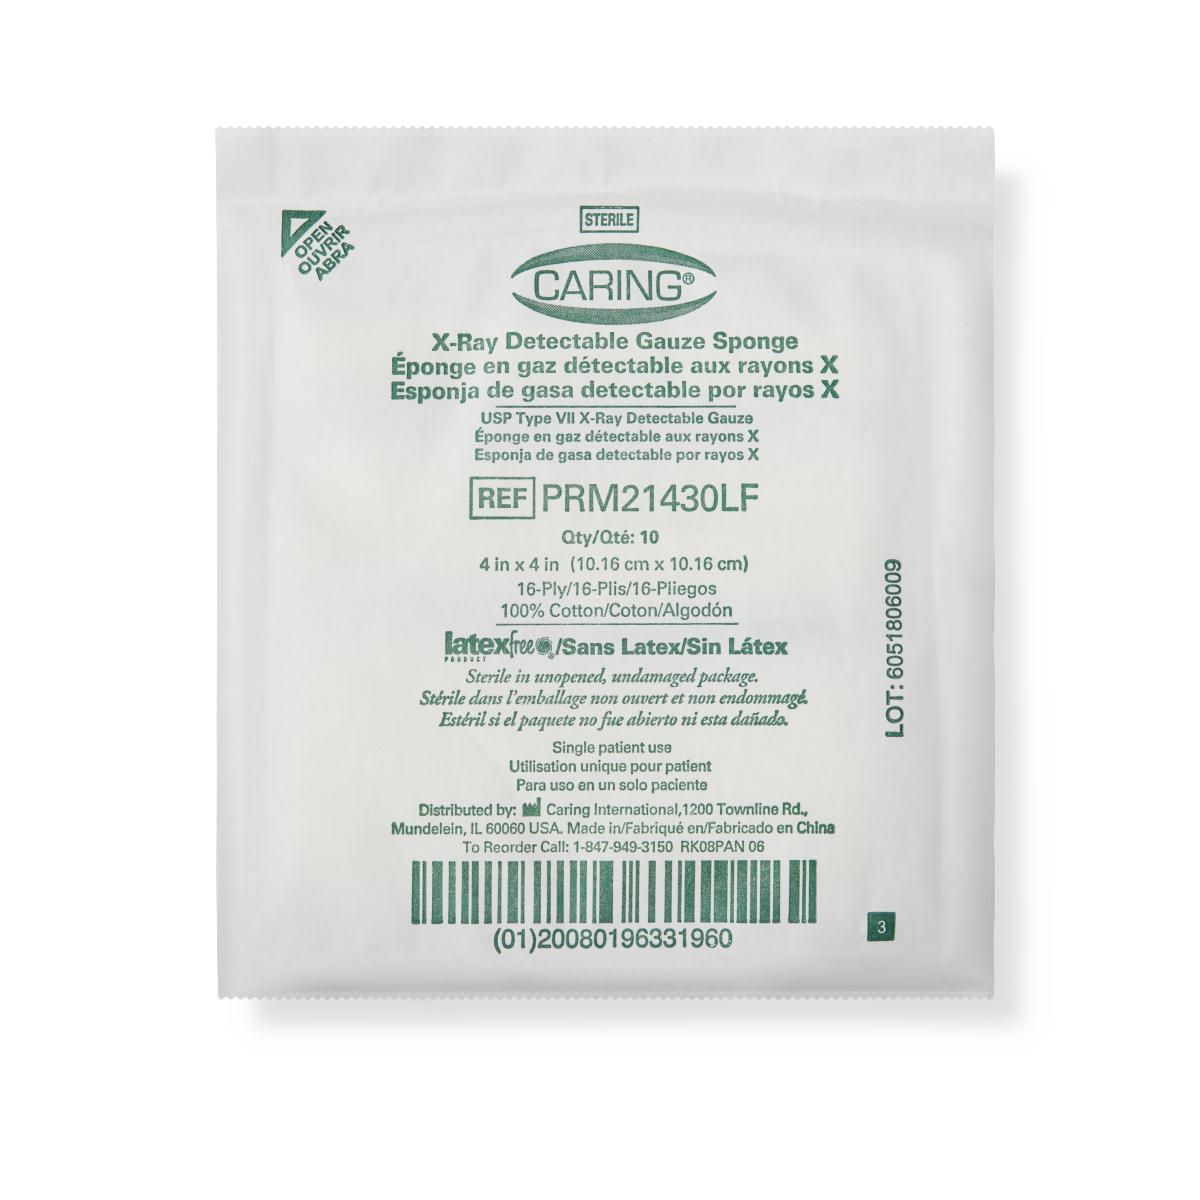 1350 Each-Case / Gauze Sponge / 4.00000 IN OR & Surgery Supplies - MEDLINE - Wasatch Medical Supply